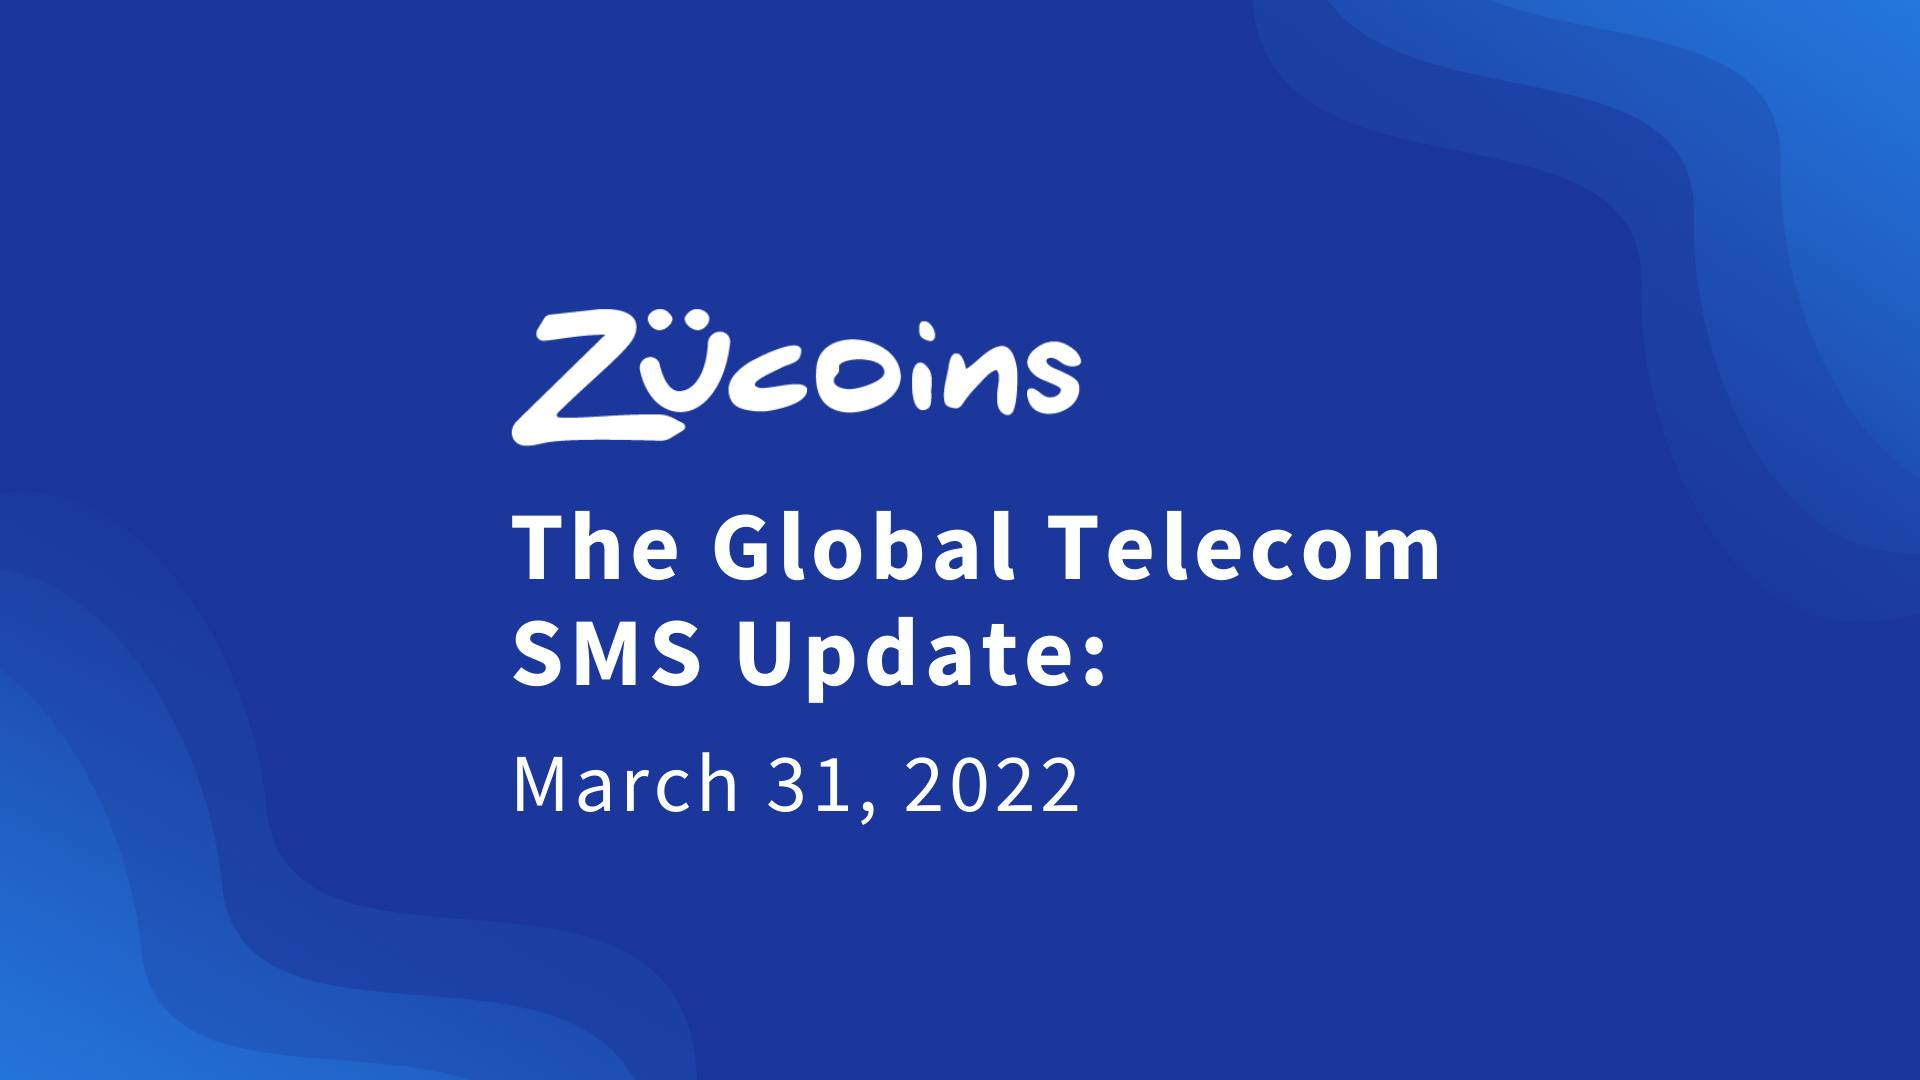 The Global Telecom SMS Update